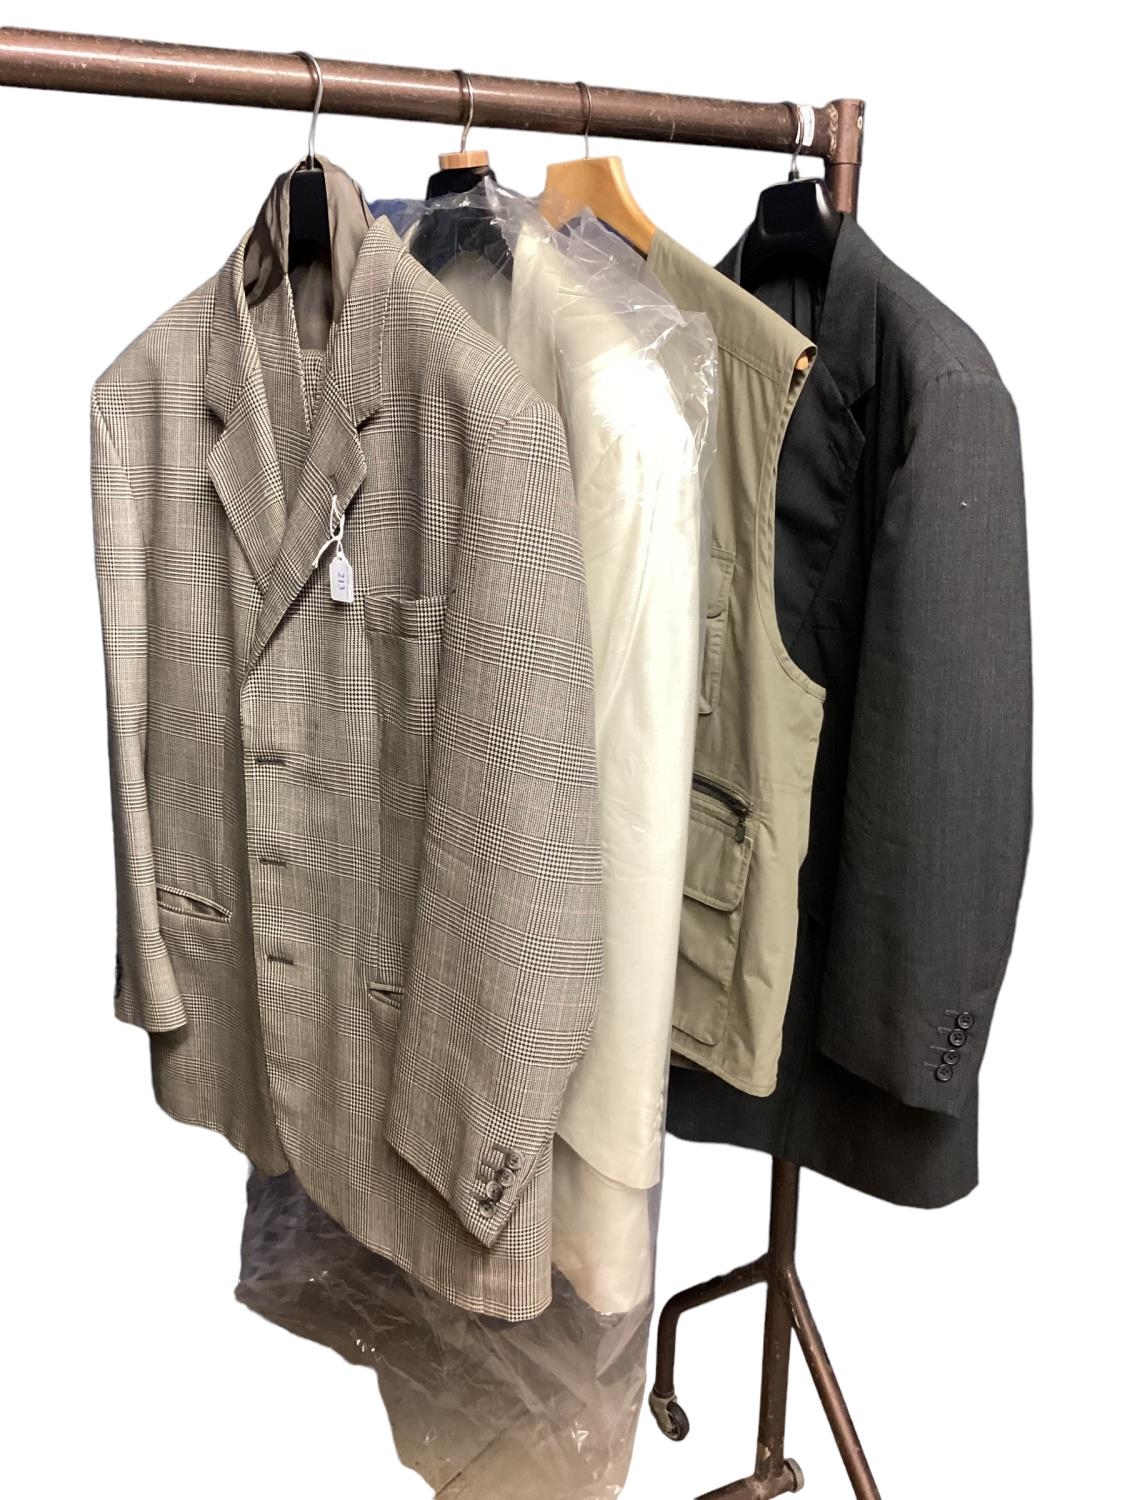 Clothing: a Prince of Wales chequed three piece gents suit, a cream jacket and a fishing waistcoat/